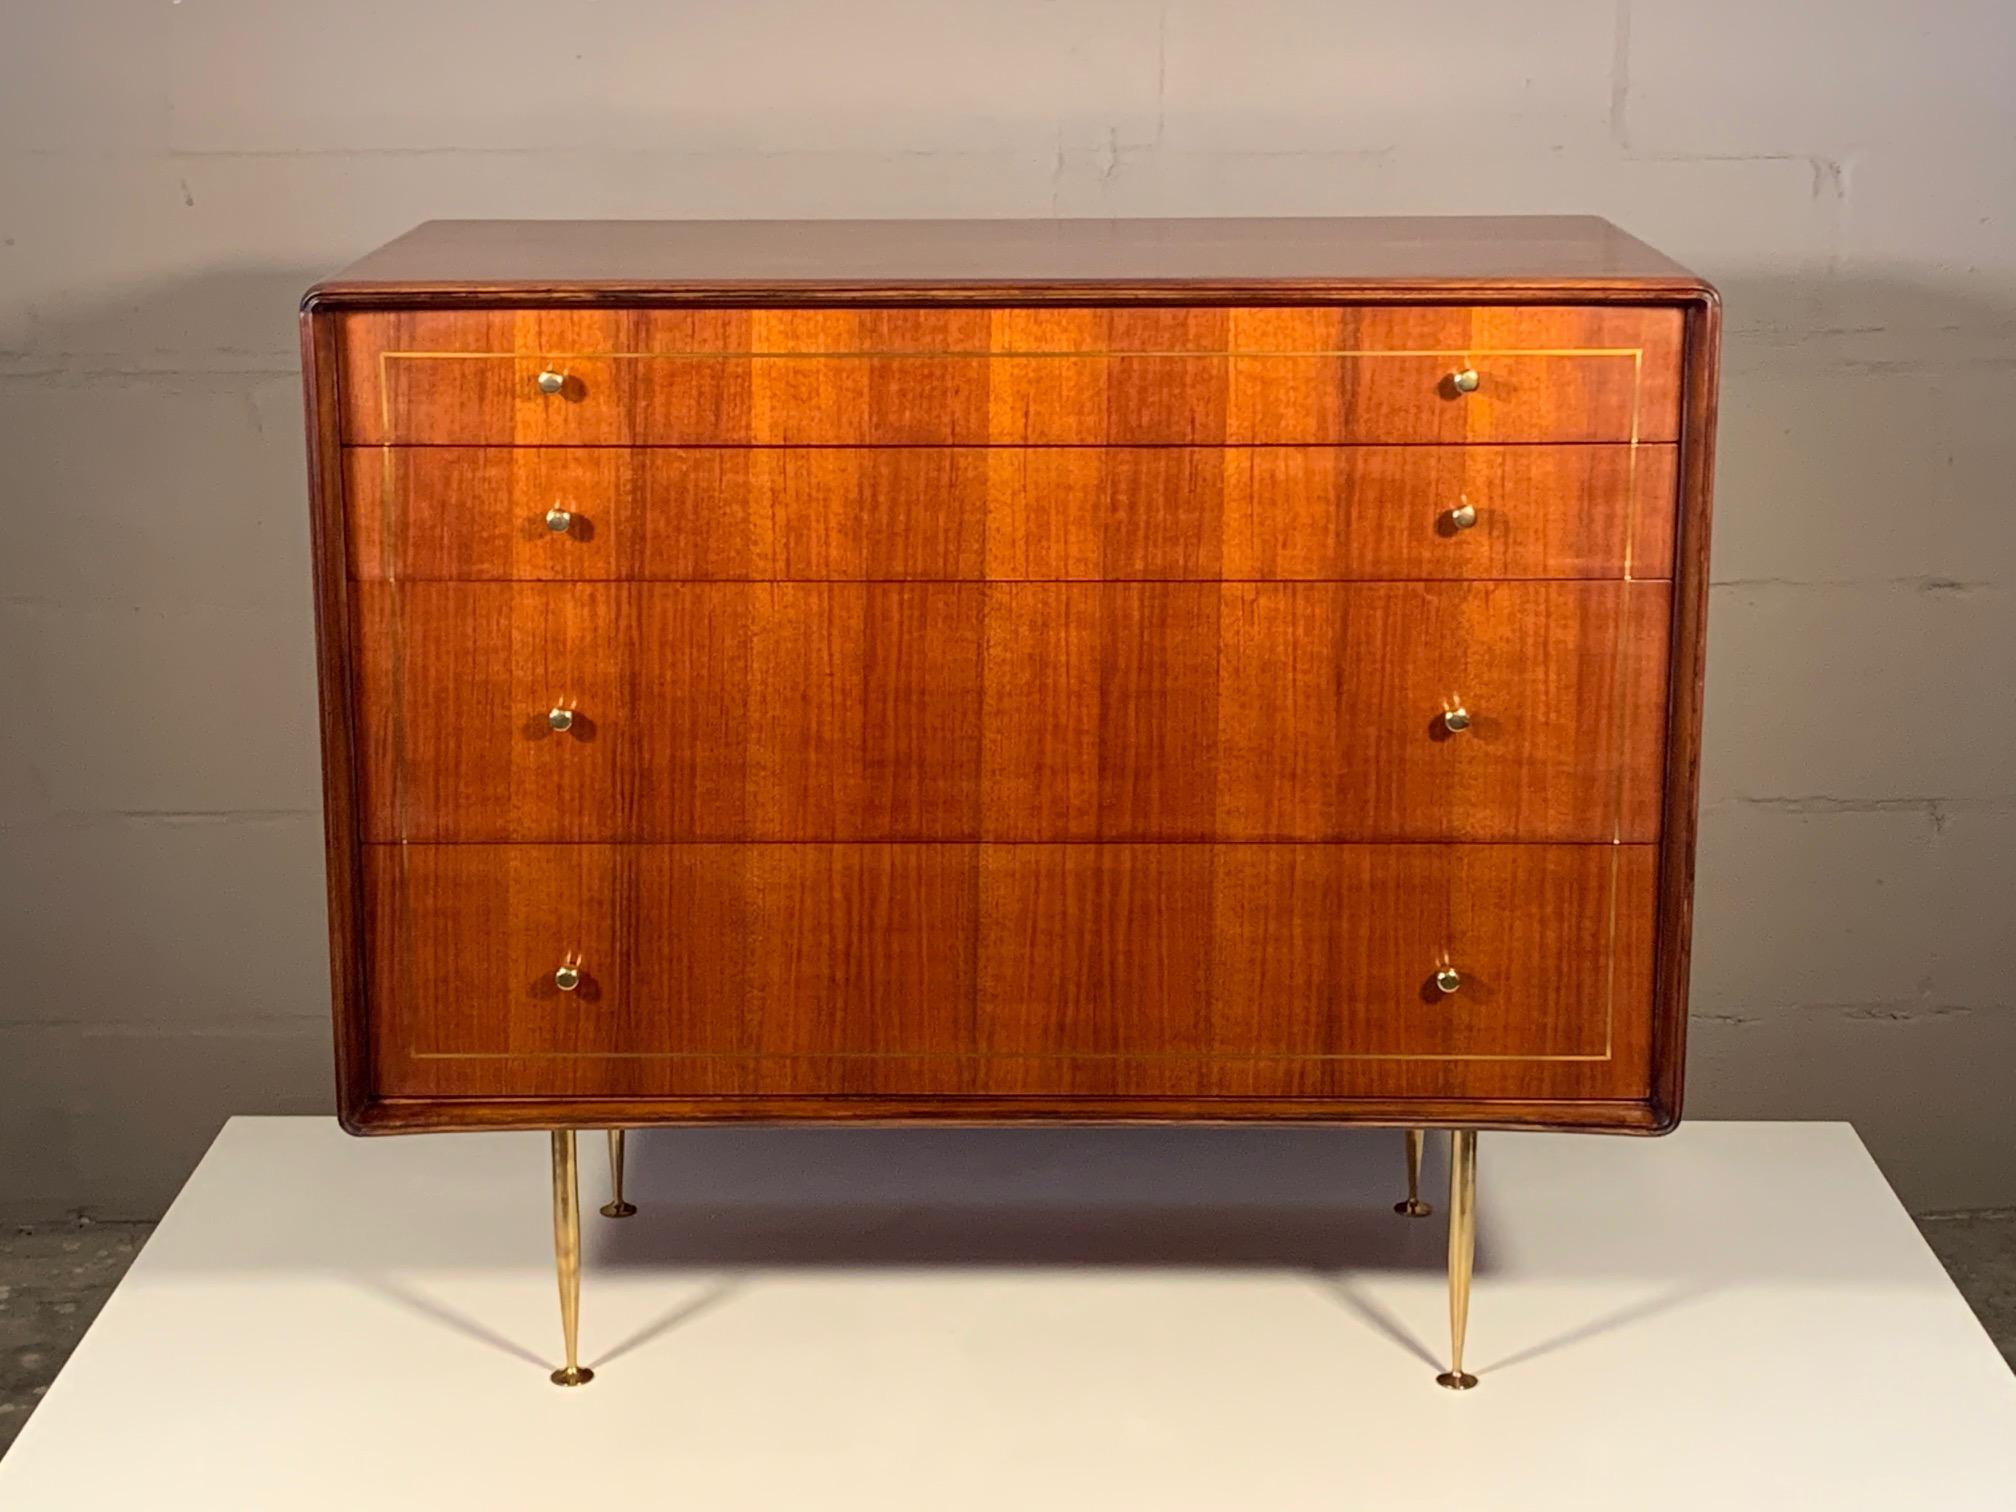 An elegant and refined chest of drawers by Erno Fabry. Made in Italy with solid brass, polished hardware and legs. Walnut construction with unusual curved front and picture frame design with brass inlay in the front drawers. Completely restored and